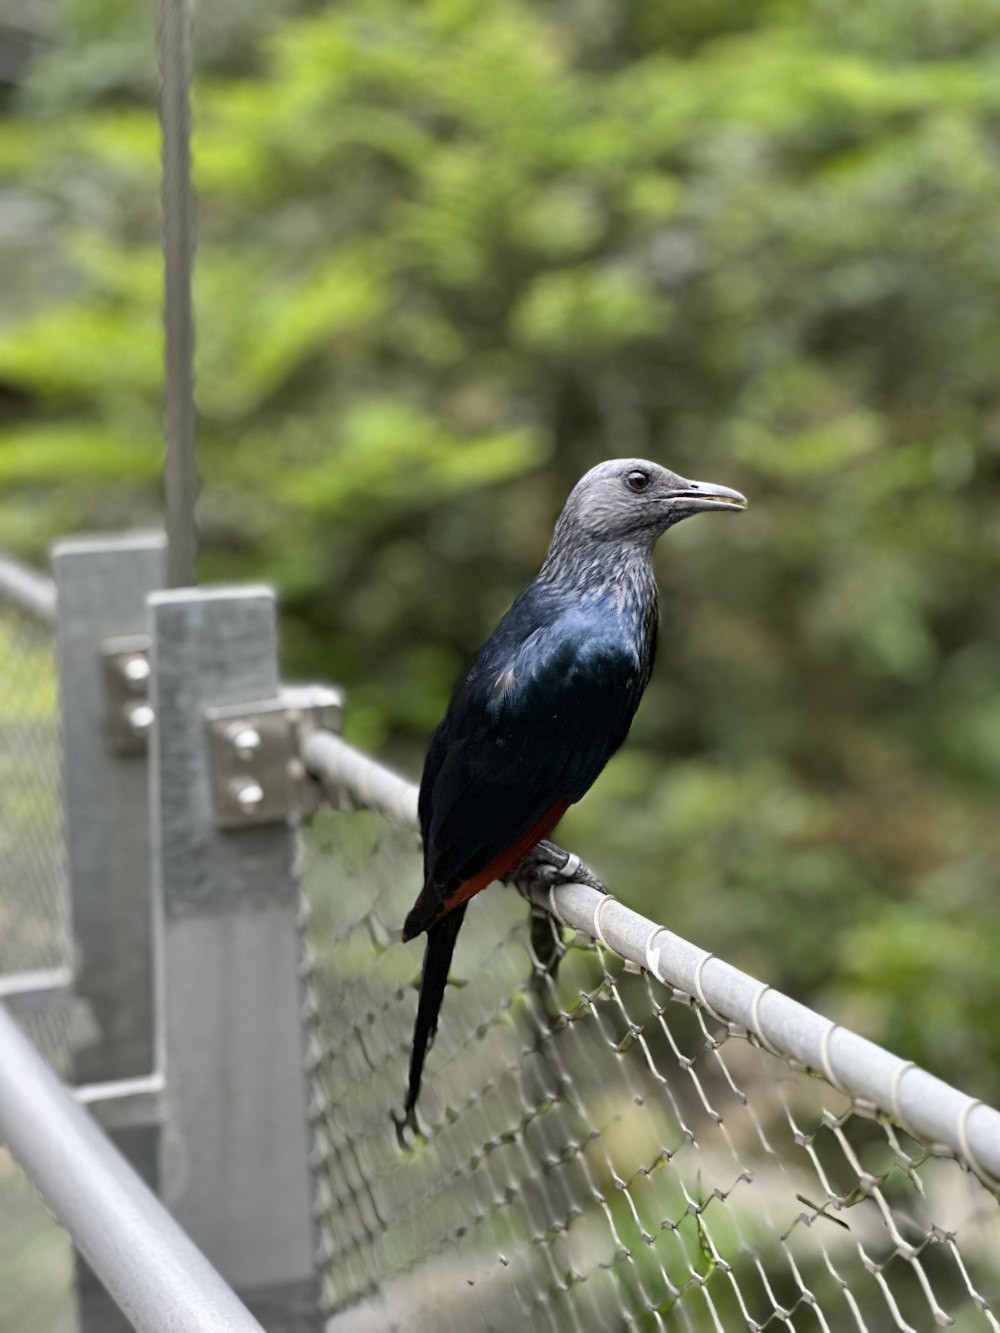 a bird is perched on a metal fence